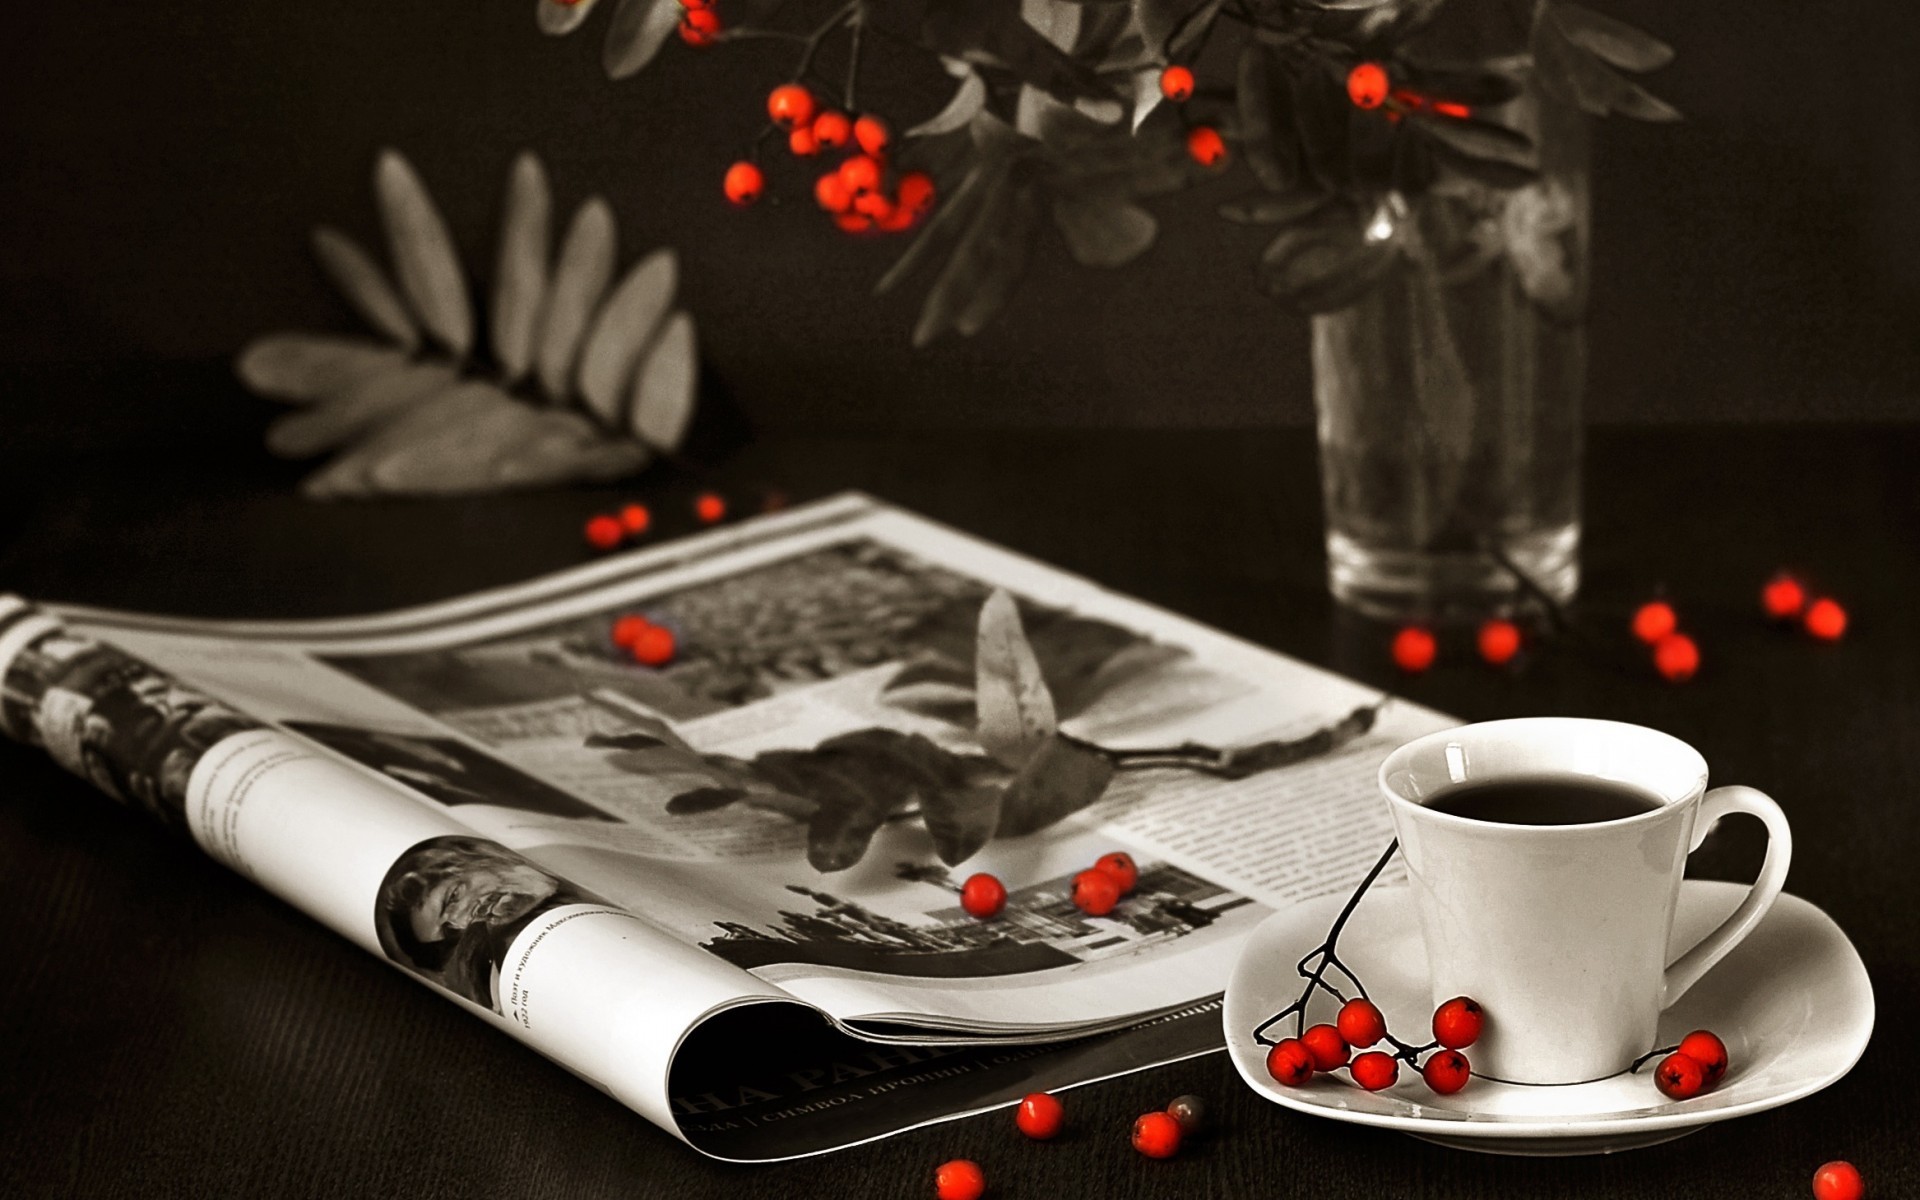 General 1920x1200 cup selective coloring magazine coffee berries food still life